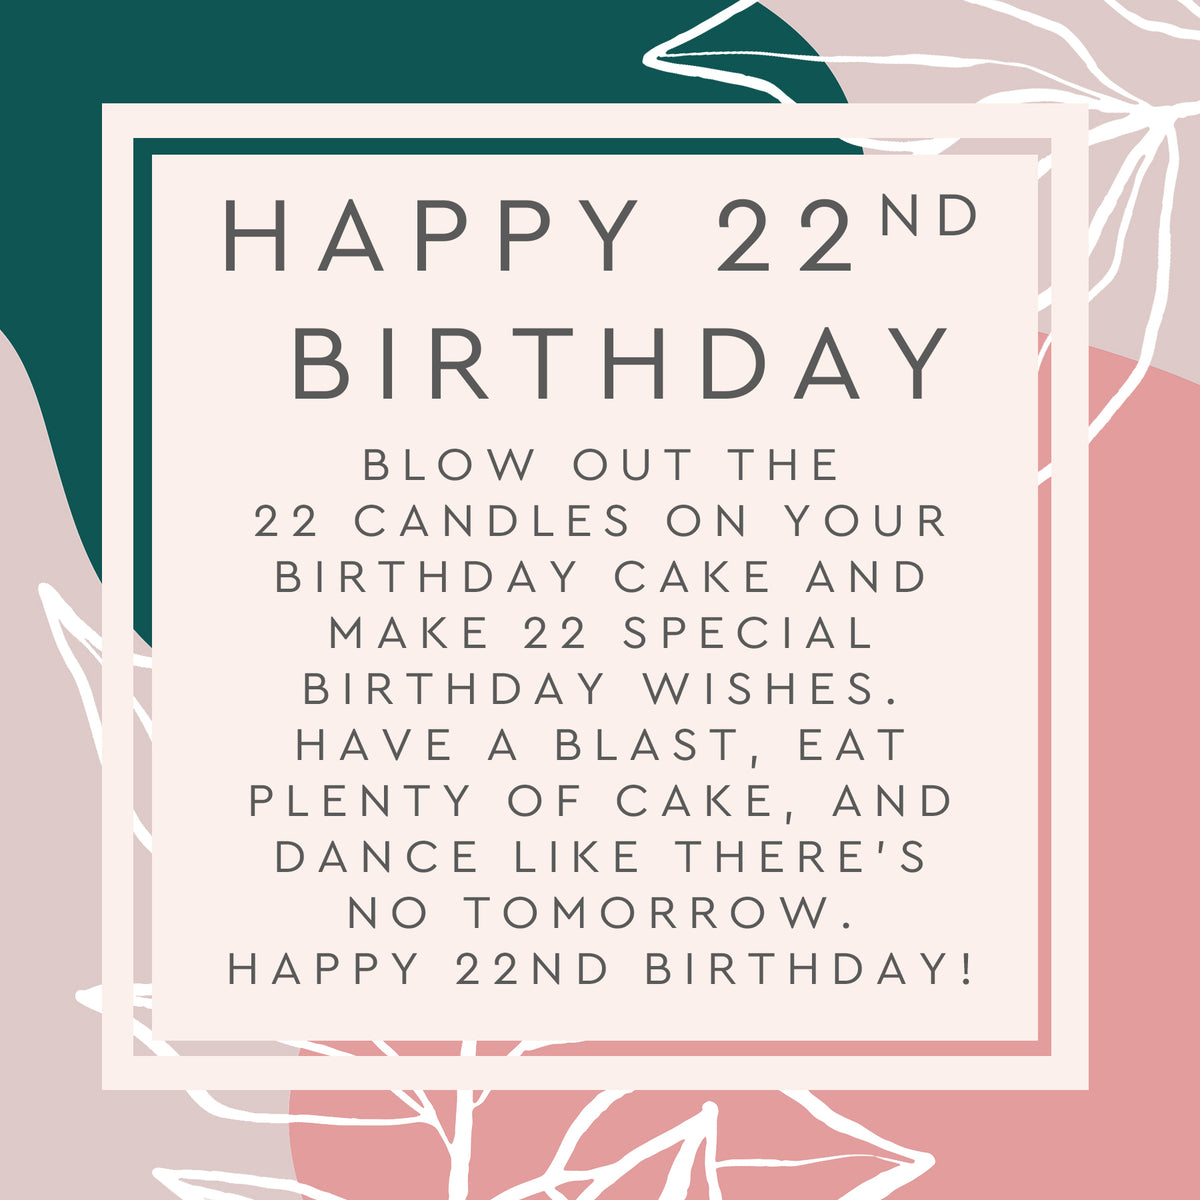 22nd Birthday Compass Necklace Spa Gift Box Set